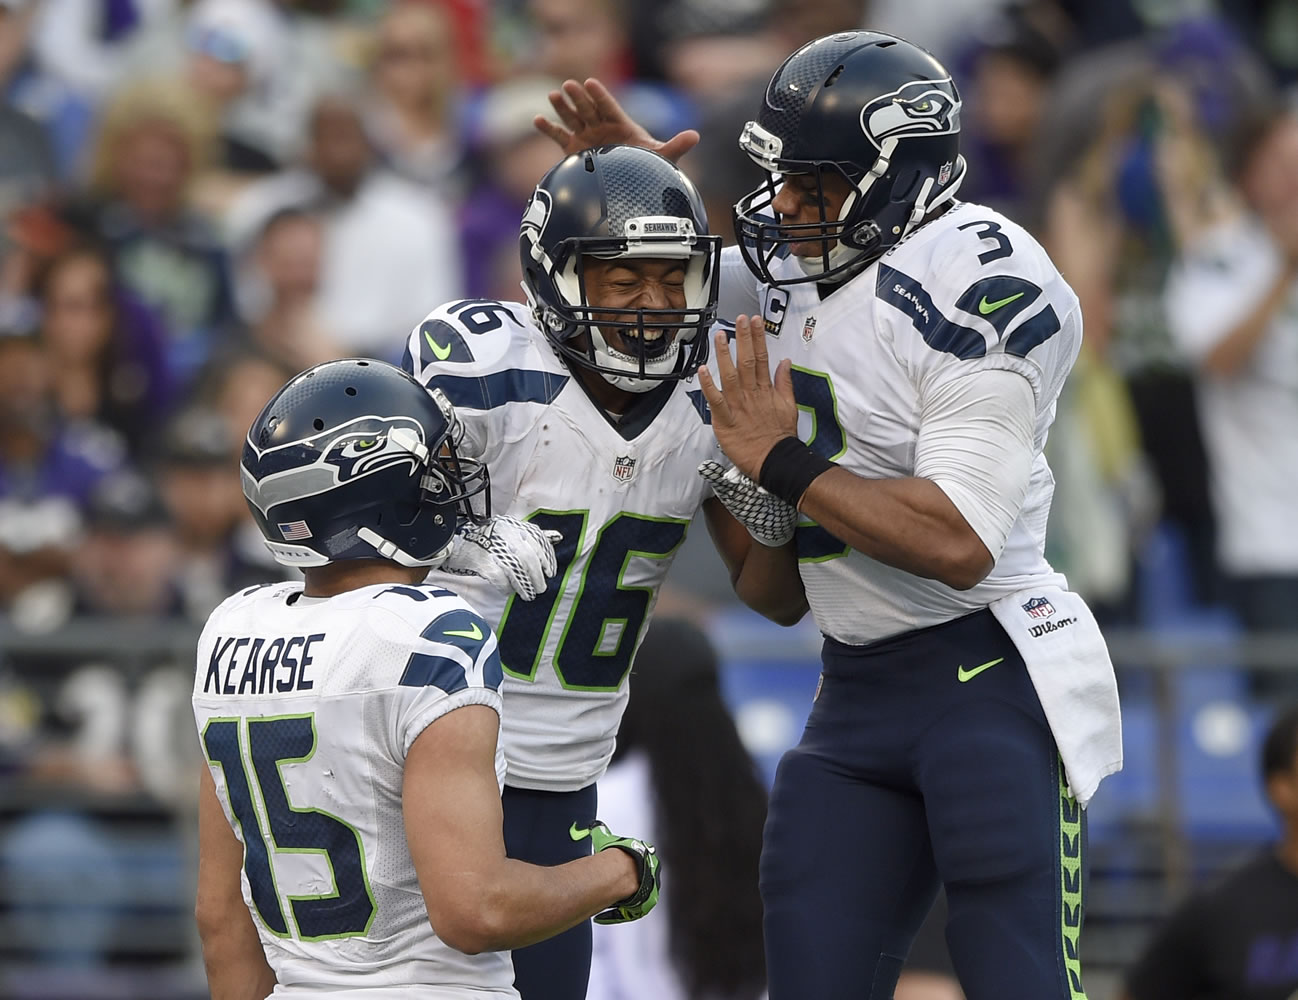 Seattle Seahawks wide receiver Jermaine Kearse (15) watches as Seahawks wide receiver Tyler Lockett (16) and Seahawks quarterback Russell Wilson (3) celebrate connecting for a touchdown during the second half an NFL football game against the Baltimore Ravens, Sunday, Dec. 13, 2015, in Baltimore.